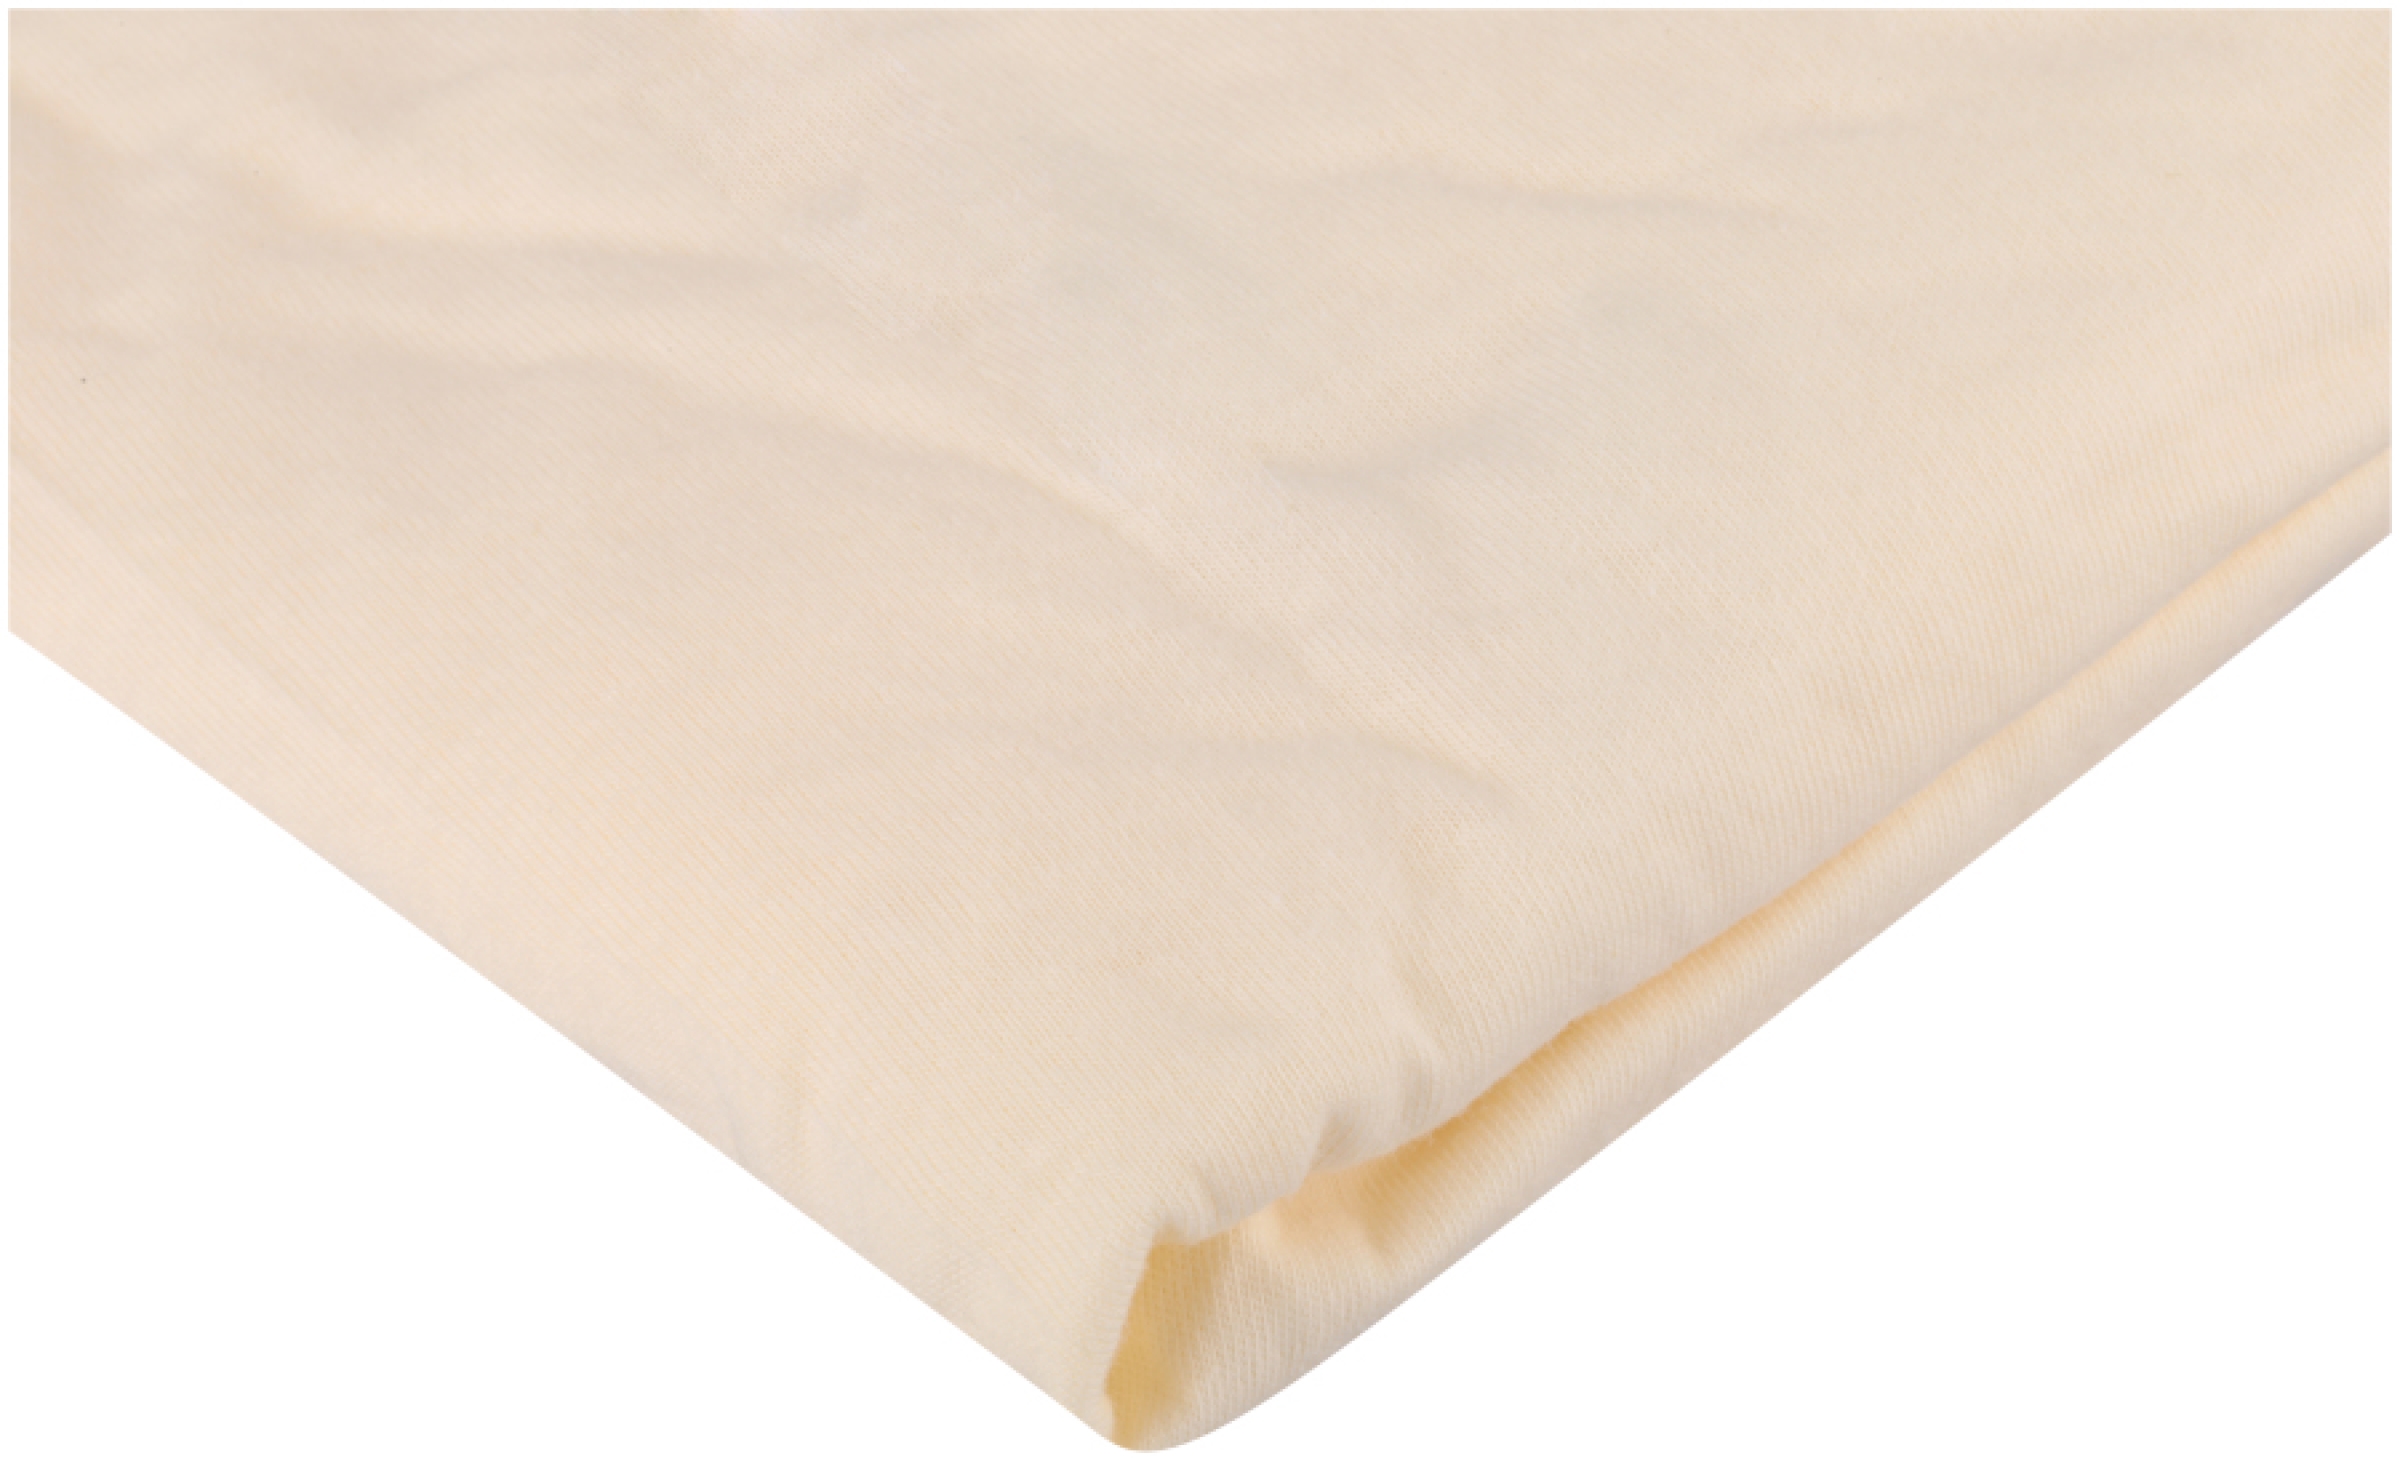 TL Care 100% Natural Cotton Value Jersey Knit Fitted Portable/Mini-Crib ...